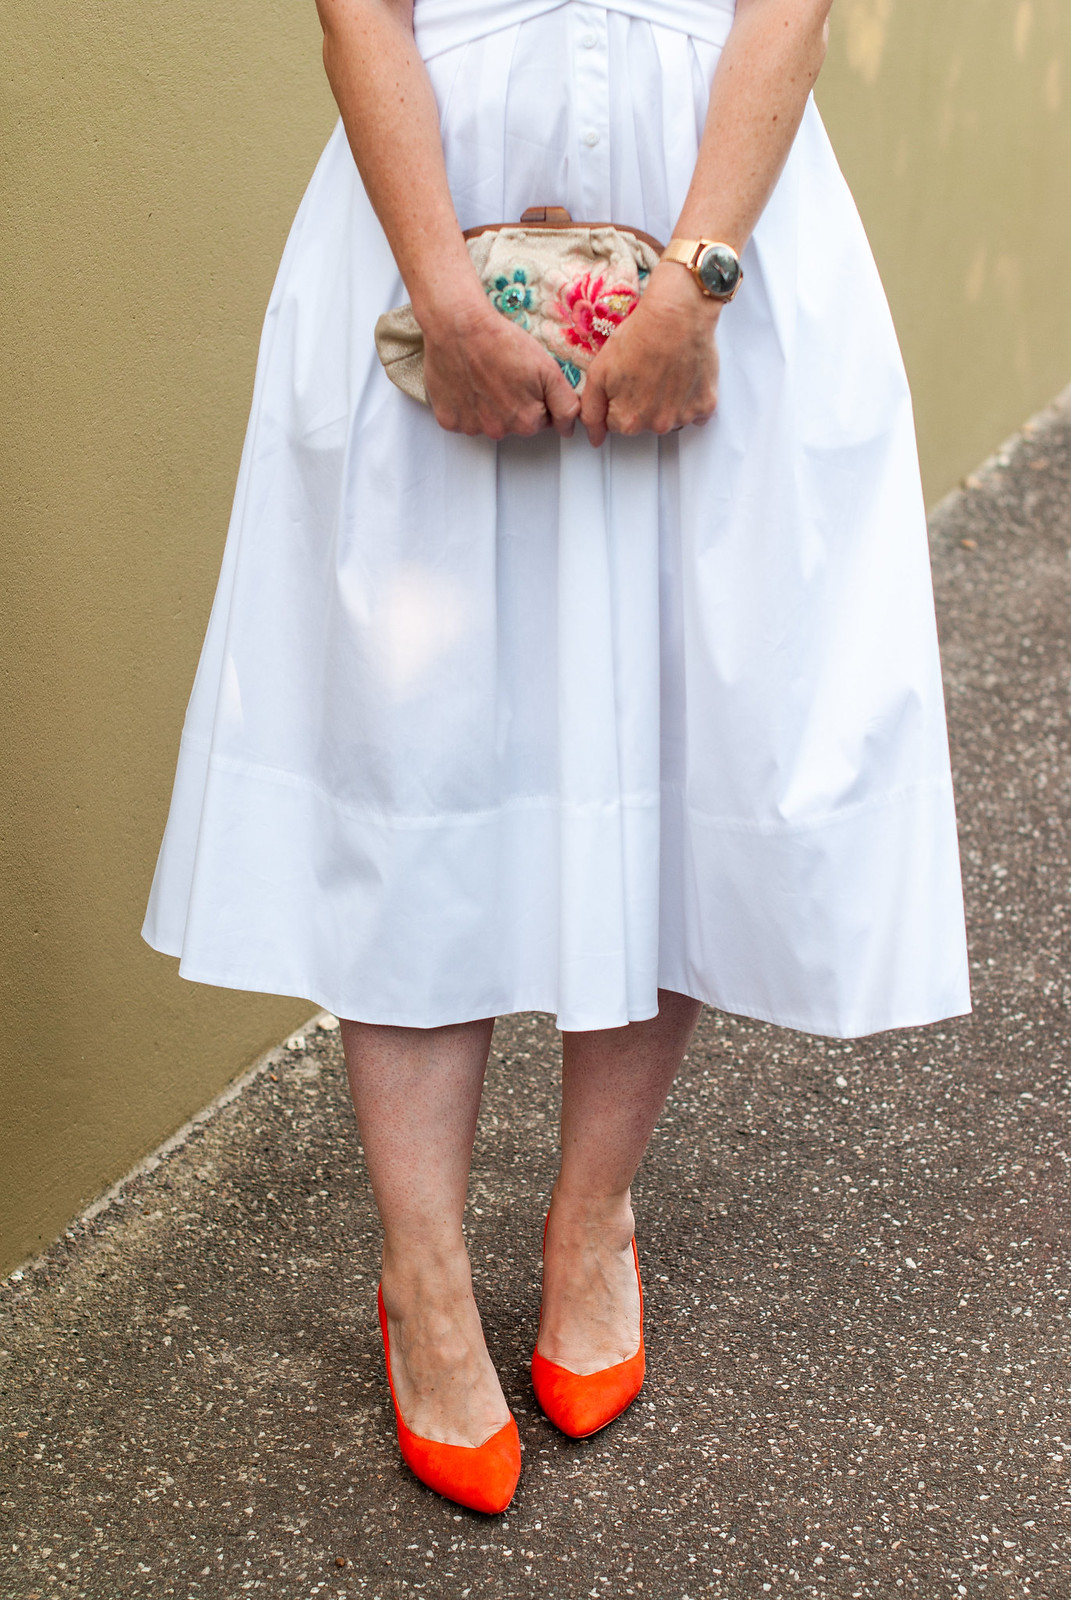 Channelling Marilyn Monroe in a White 1950s Style Dress With Orange Heels | Not Dressed As Lamb, over 40 style, over 40 fashion